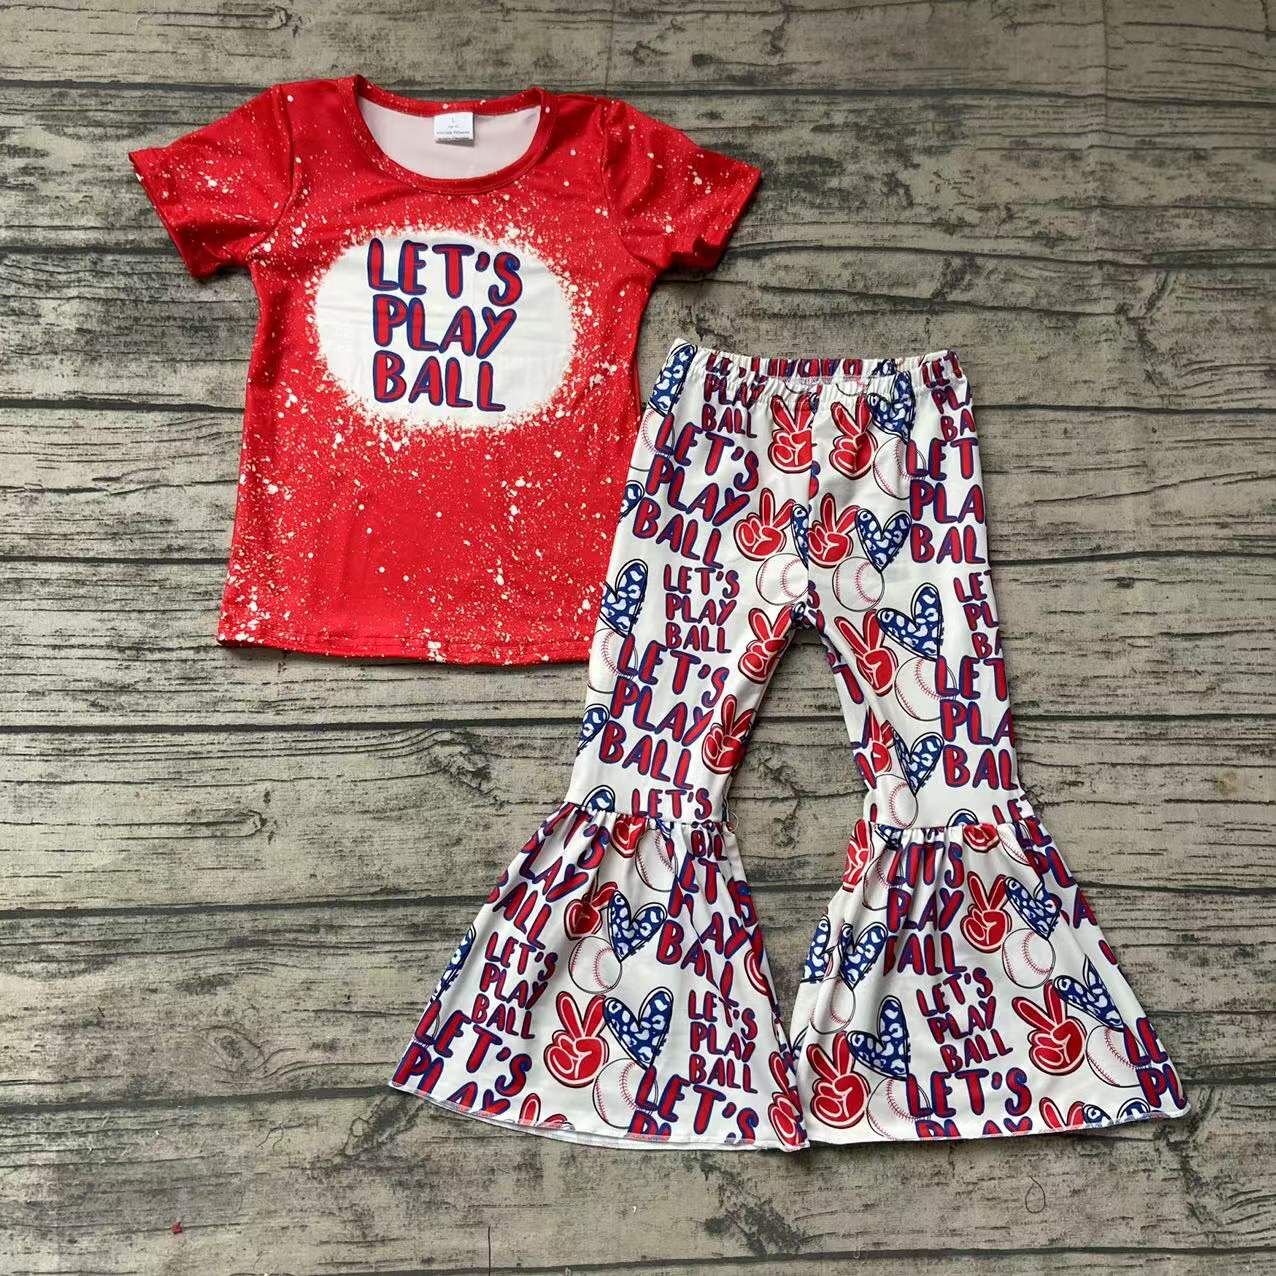 let's play ball bells outfit